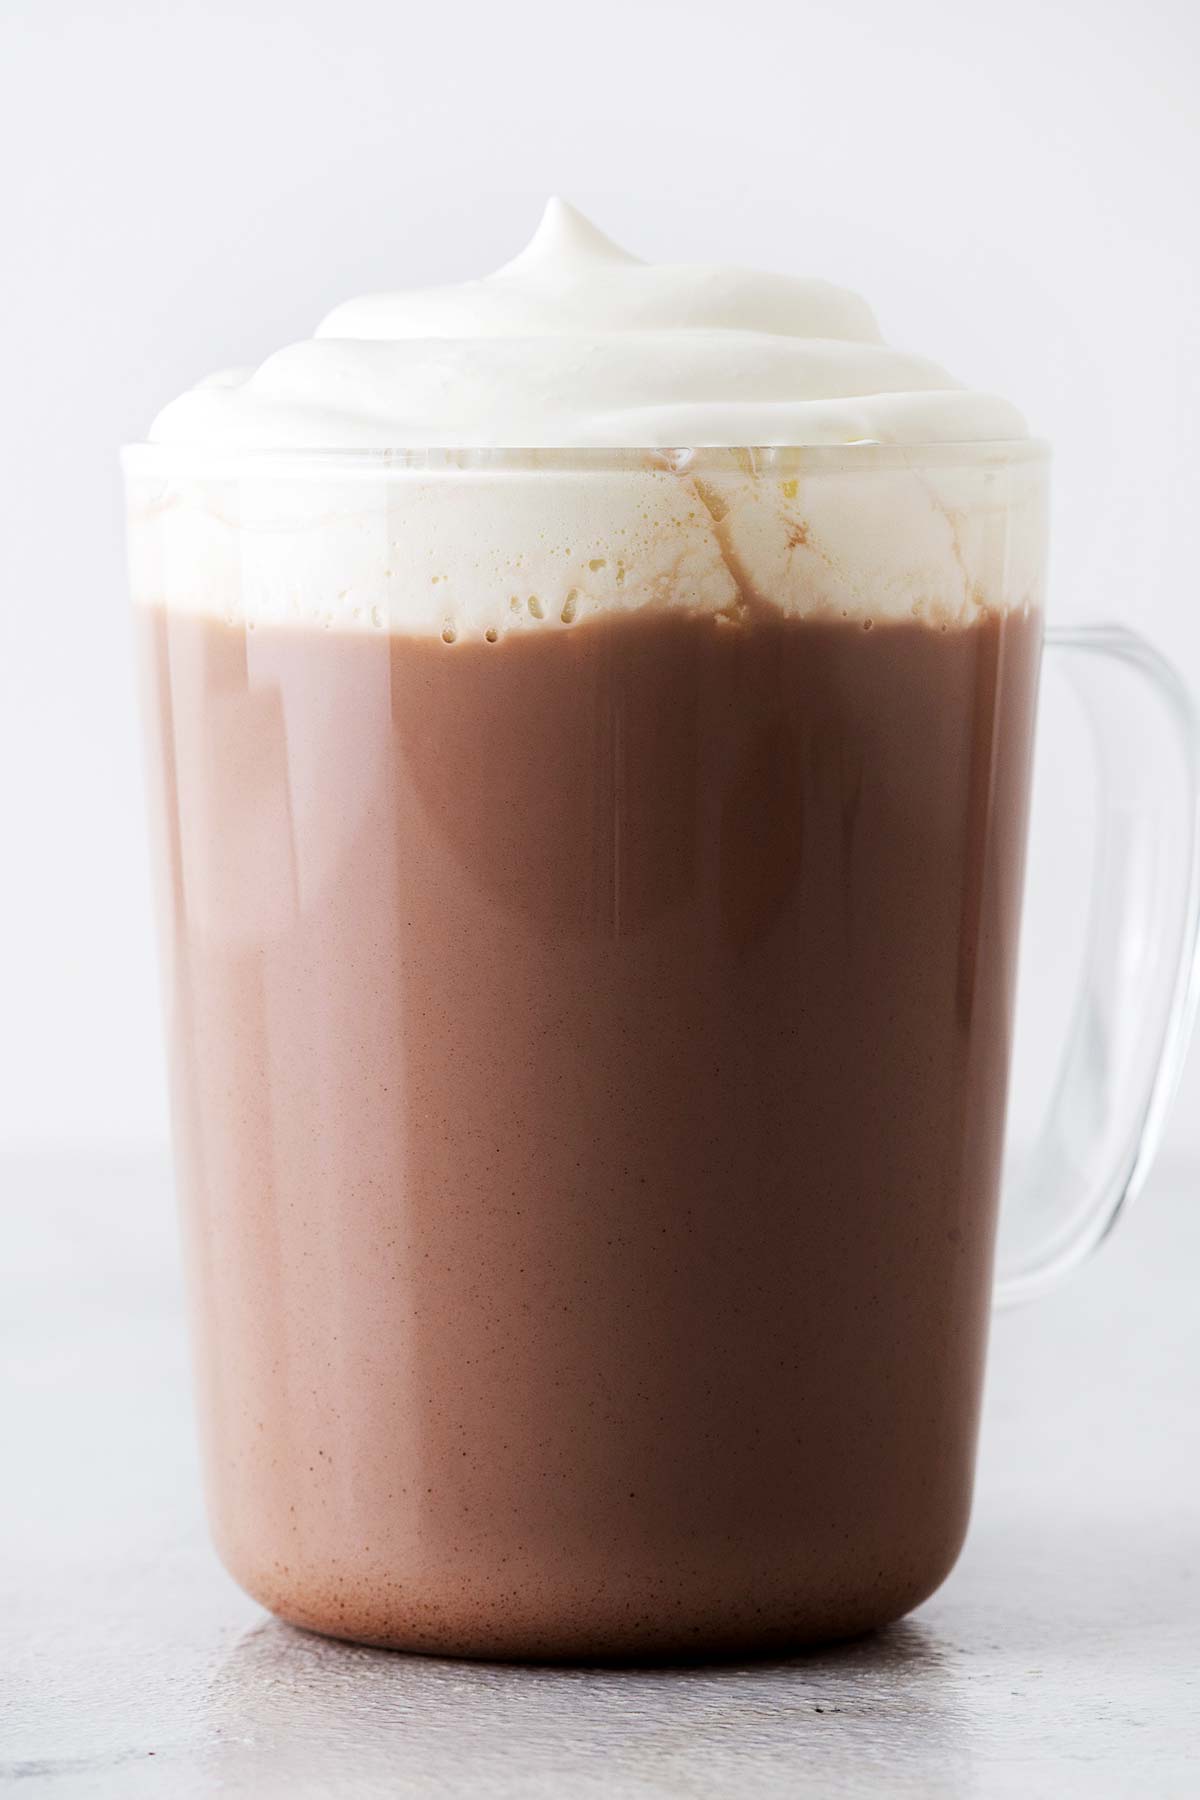 Homemade hot chocolate with whipped cream in a glass mug.